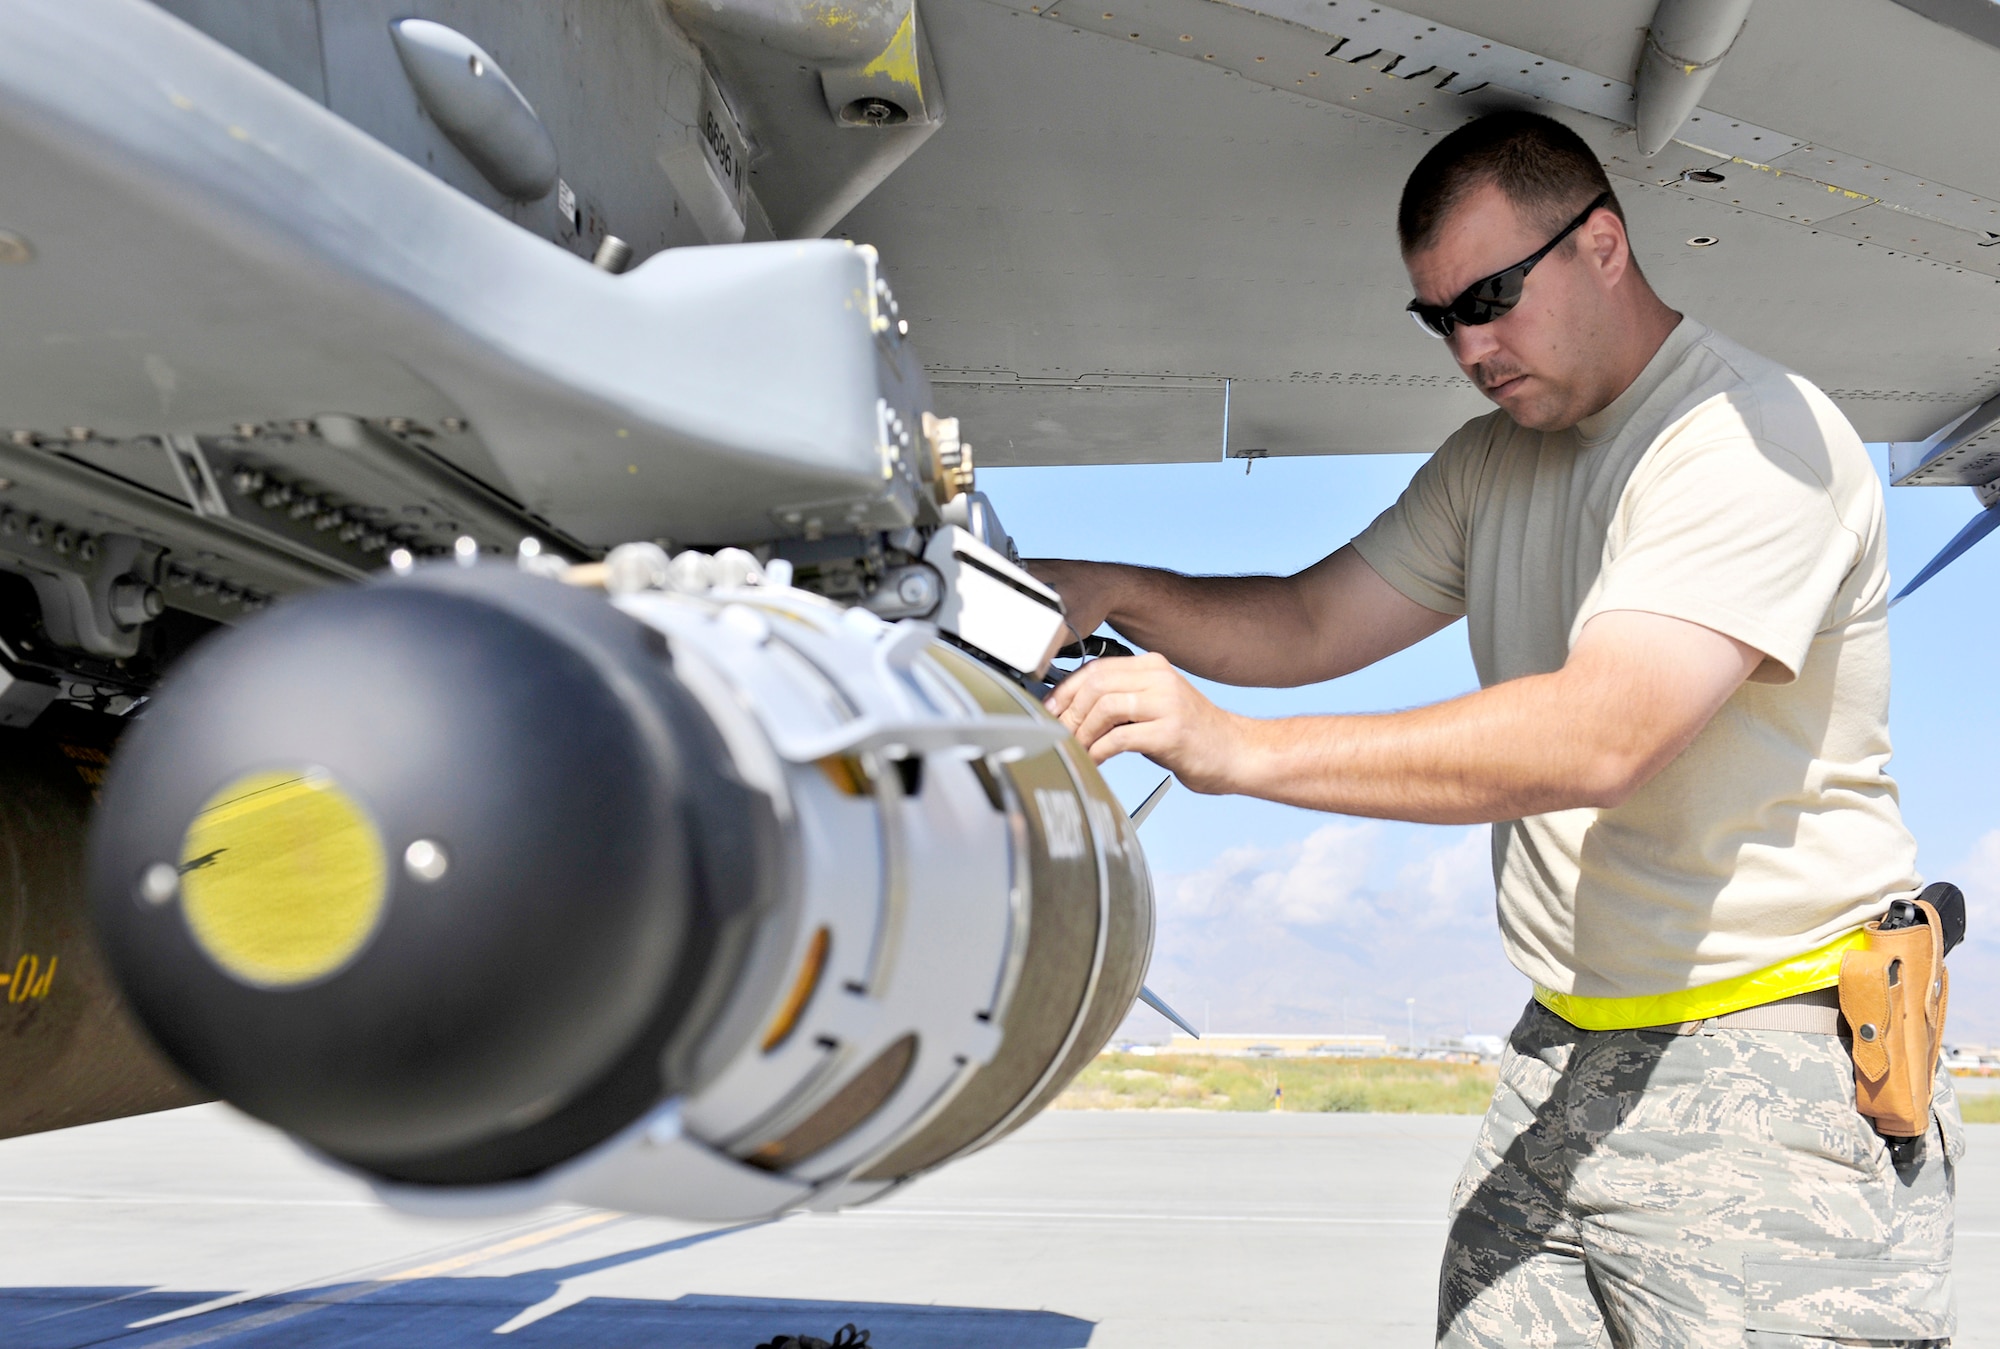 Tech Sgt. Darrin Sather performs a supervisory post load on a guided bomb unit-54 loaded on an F-16 Fighting Falcon Sept. 30, 2010, at Bagram Airfield, Afghanistan. The GBU-54 is the Air Force's newest 500-pound precision weapon, equipped with a special targeting system that uses a combination of Global Position System and laser guidance to accurately engage and destroy moving targets. Sergeant Sather is a weapons expeditor assigned to the 455th Expeditionary Aircraft Maintenance Squadron. (U.S. Air Force photo/Staff Sgt. Christopher Boitz)